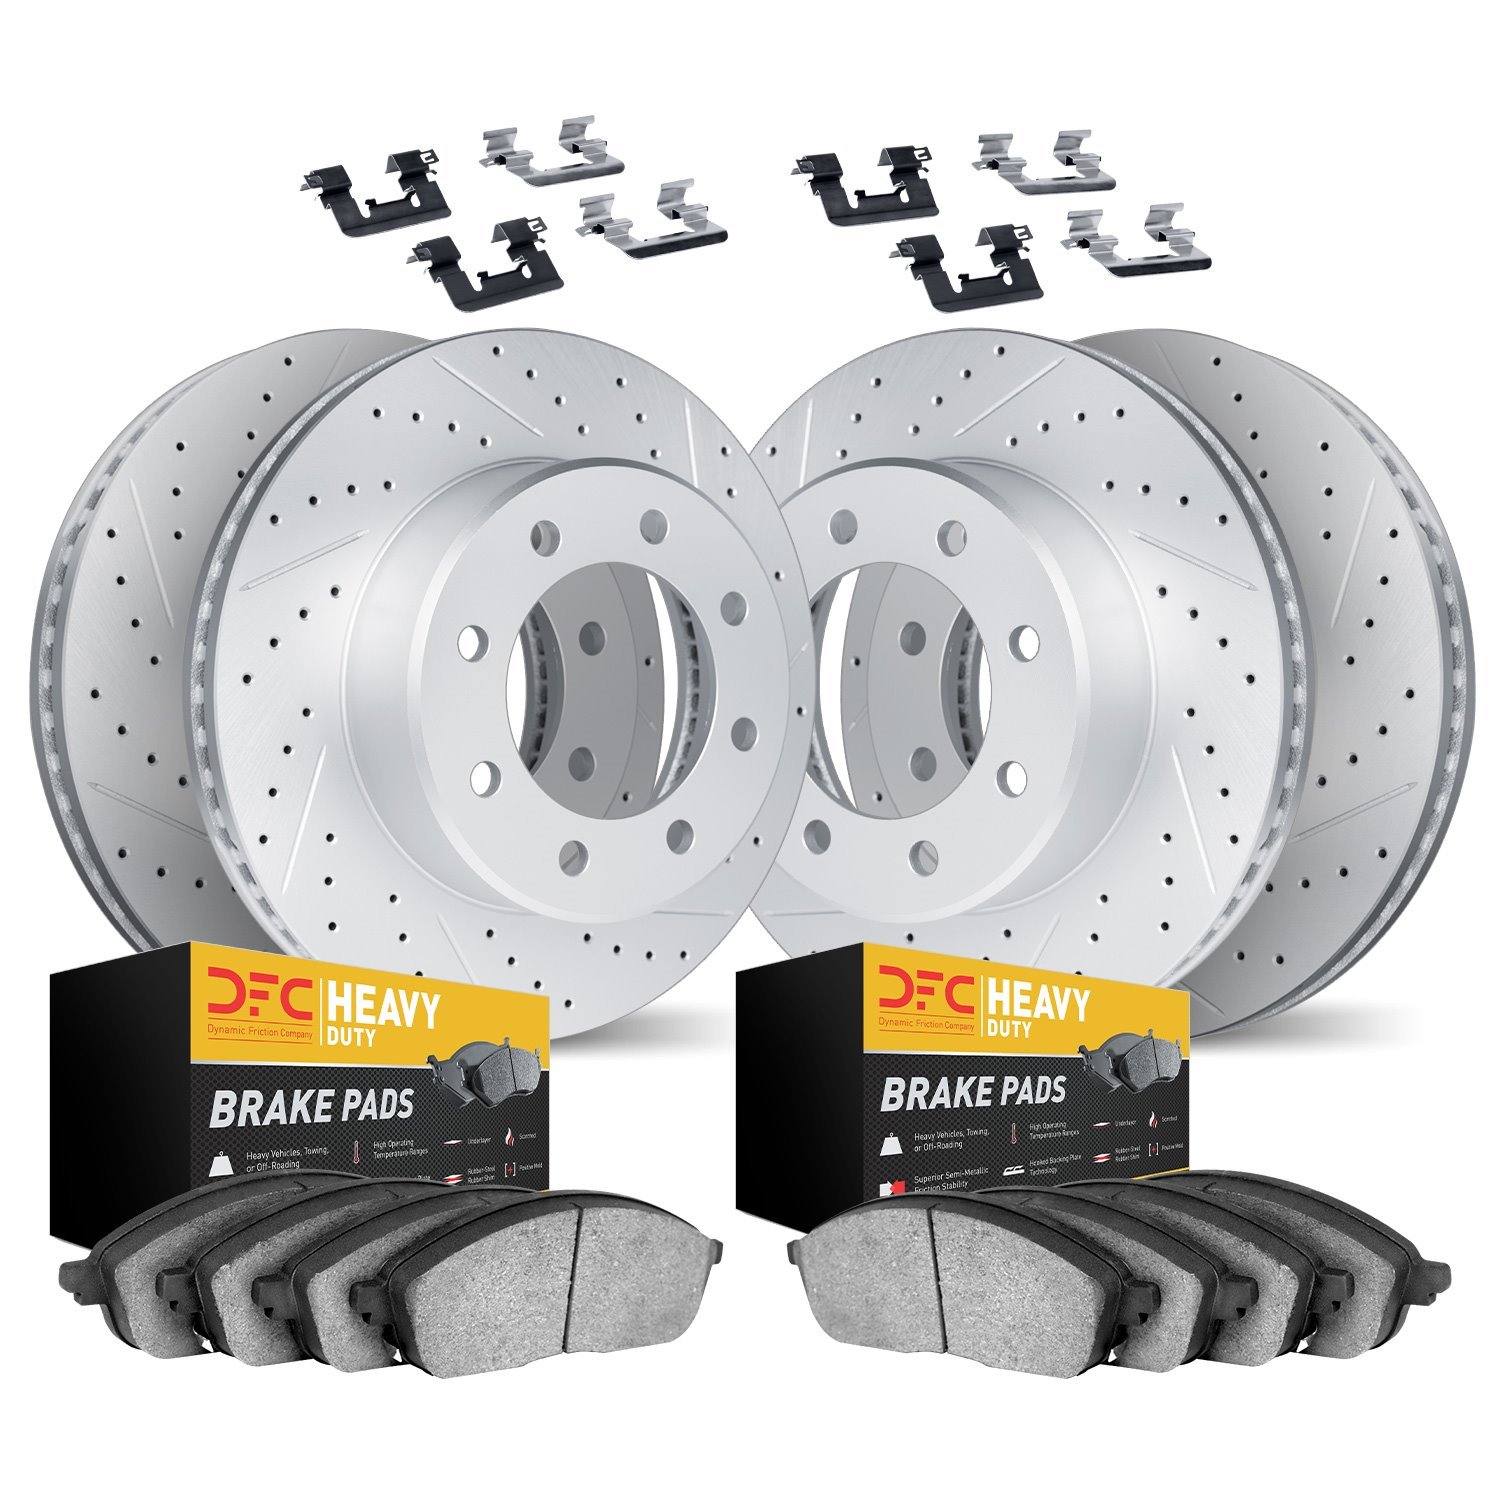 2214-99080 Geoperformance Drilled/Slotted Rotors w/Heavy-Duty Pads Kit & Hardware, 2005-2007 Ford/Lincoln/Mercury/Mazda, Positio